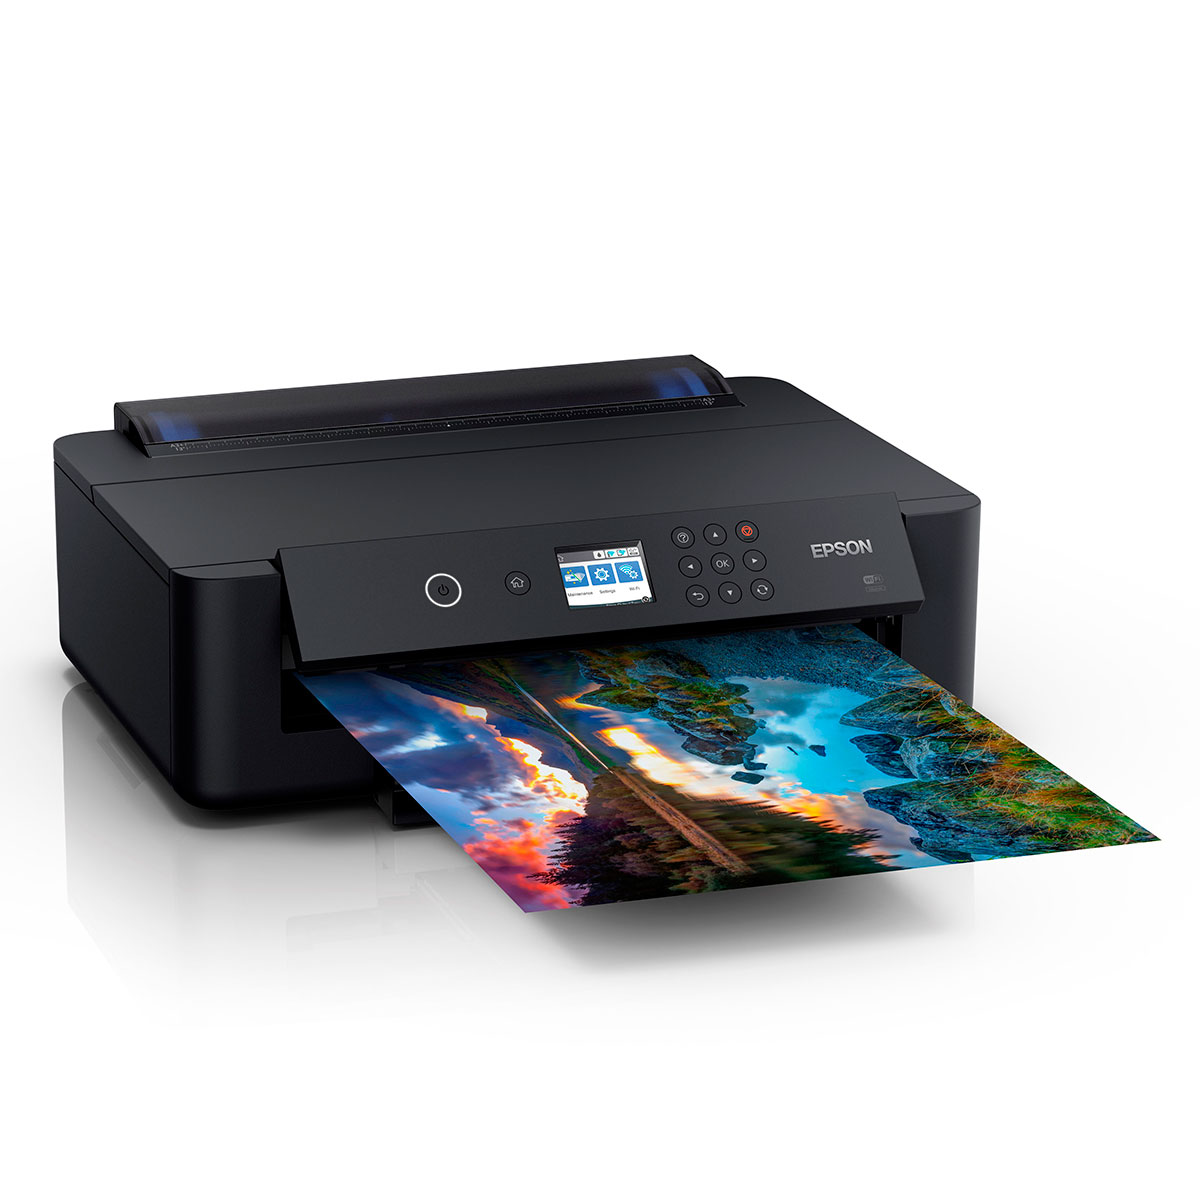 Uendelighed ide Konsultere Epson Expression Photo XP-15000 A3+ Fotoprinter